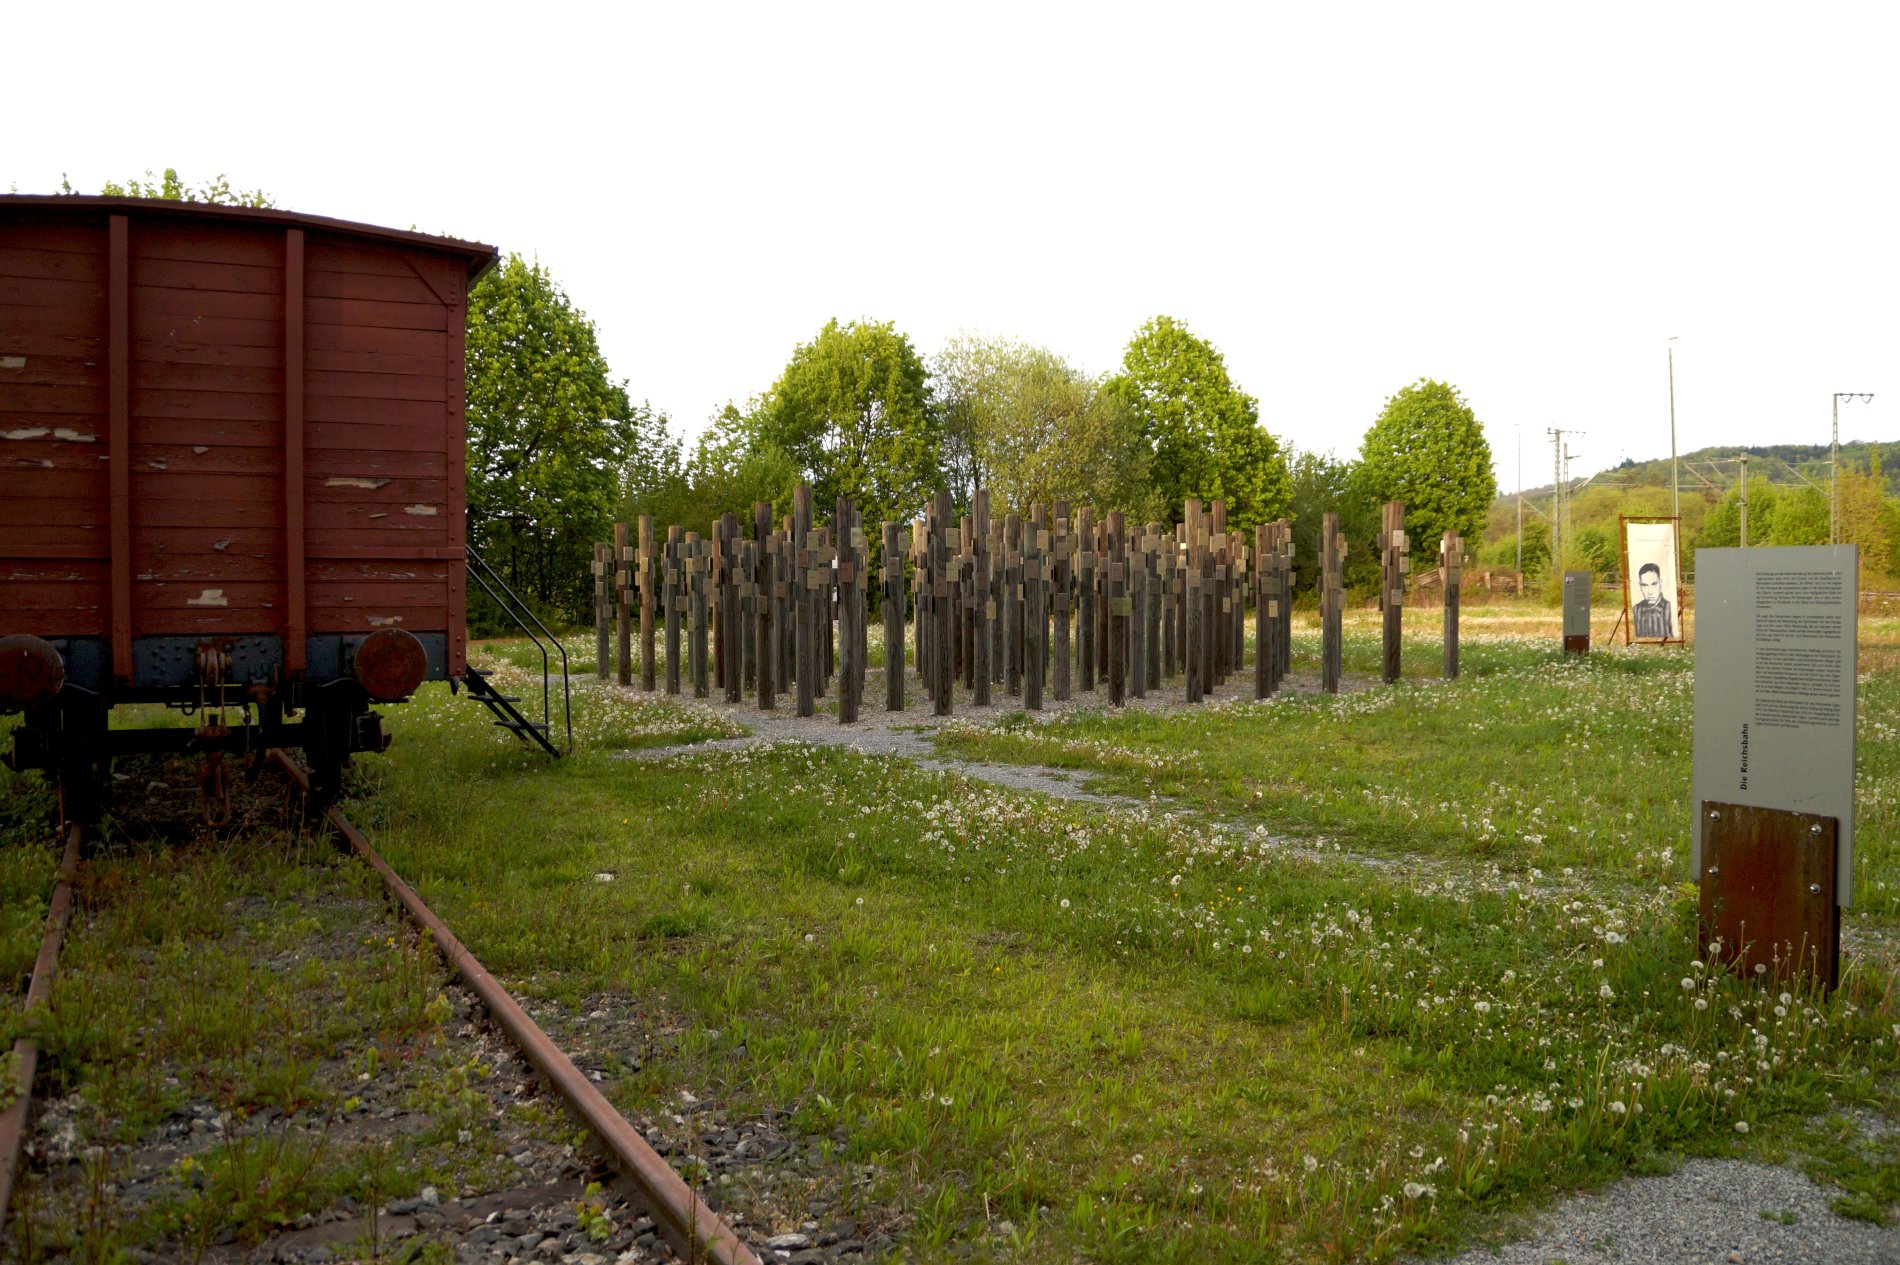 Insights into the Concentration Camp memorial Hessental